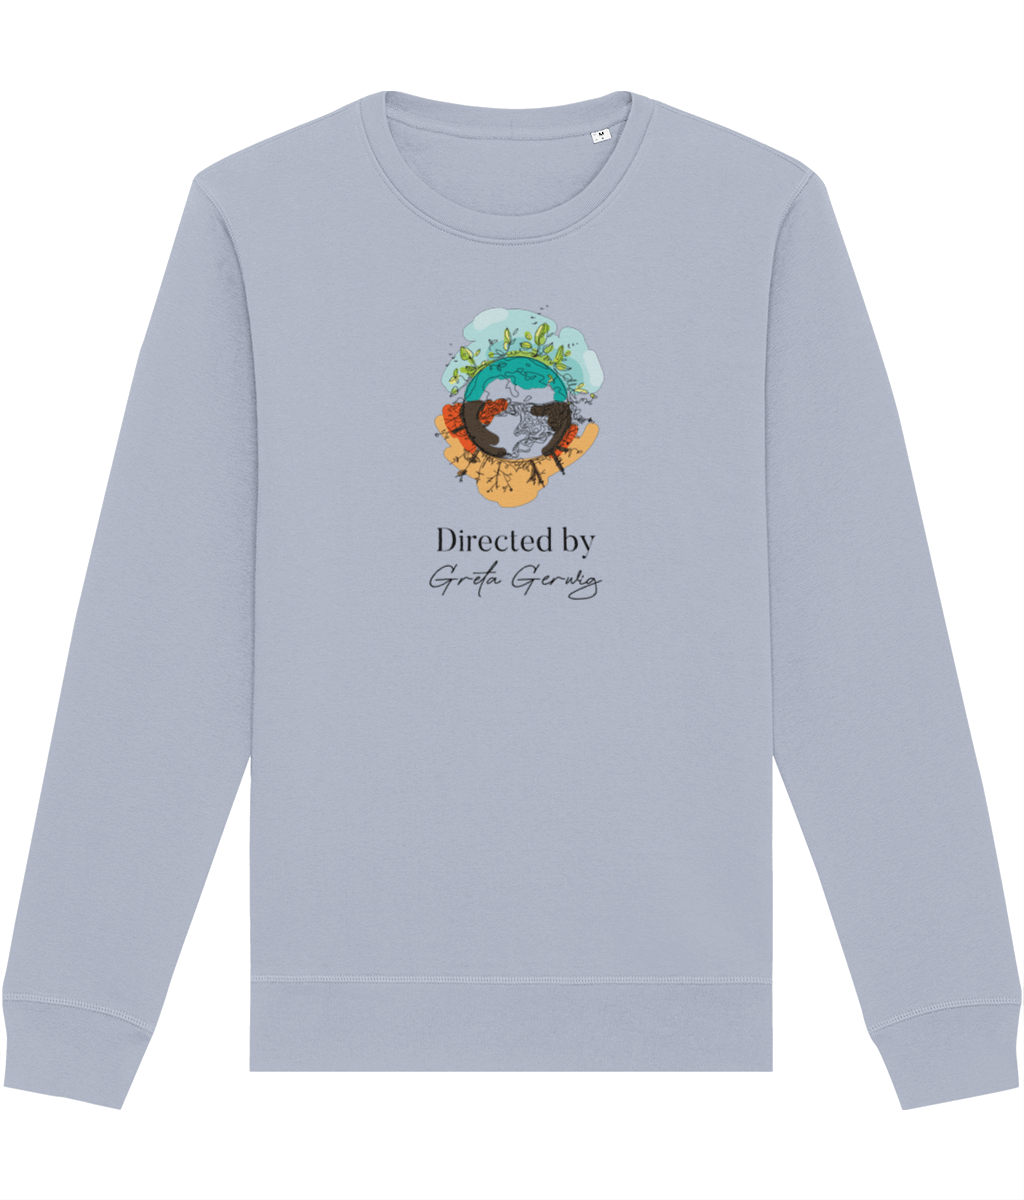 Climate Change 'Directed by Greta Gerwig' Organic Cotton Sweatshirt - Directed by Greta Gerwig